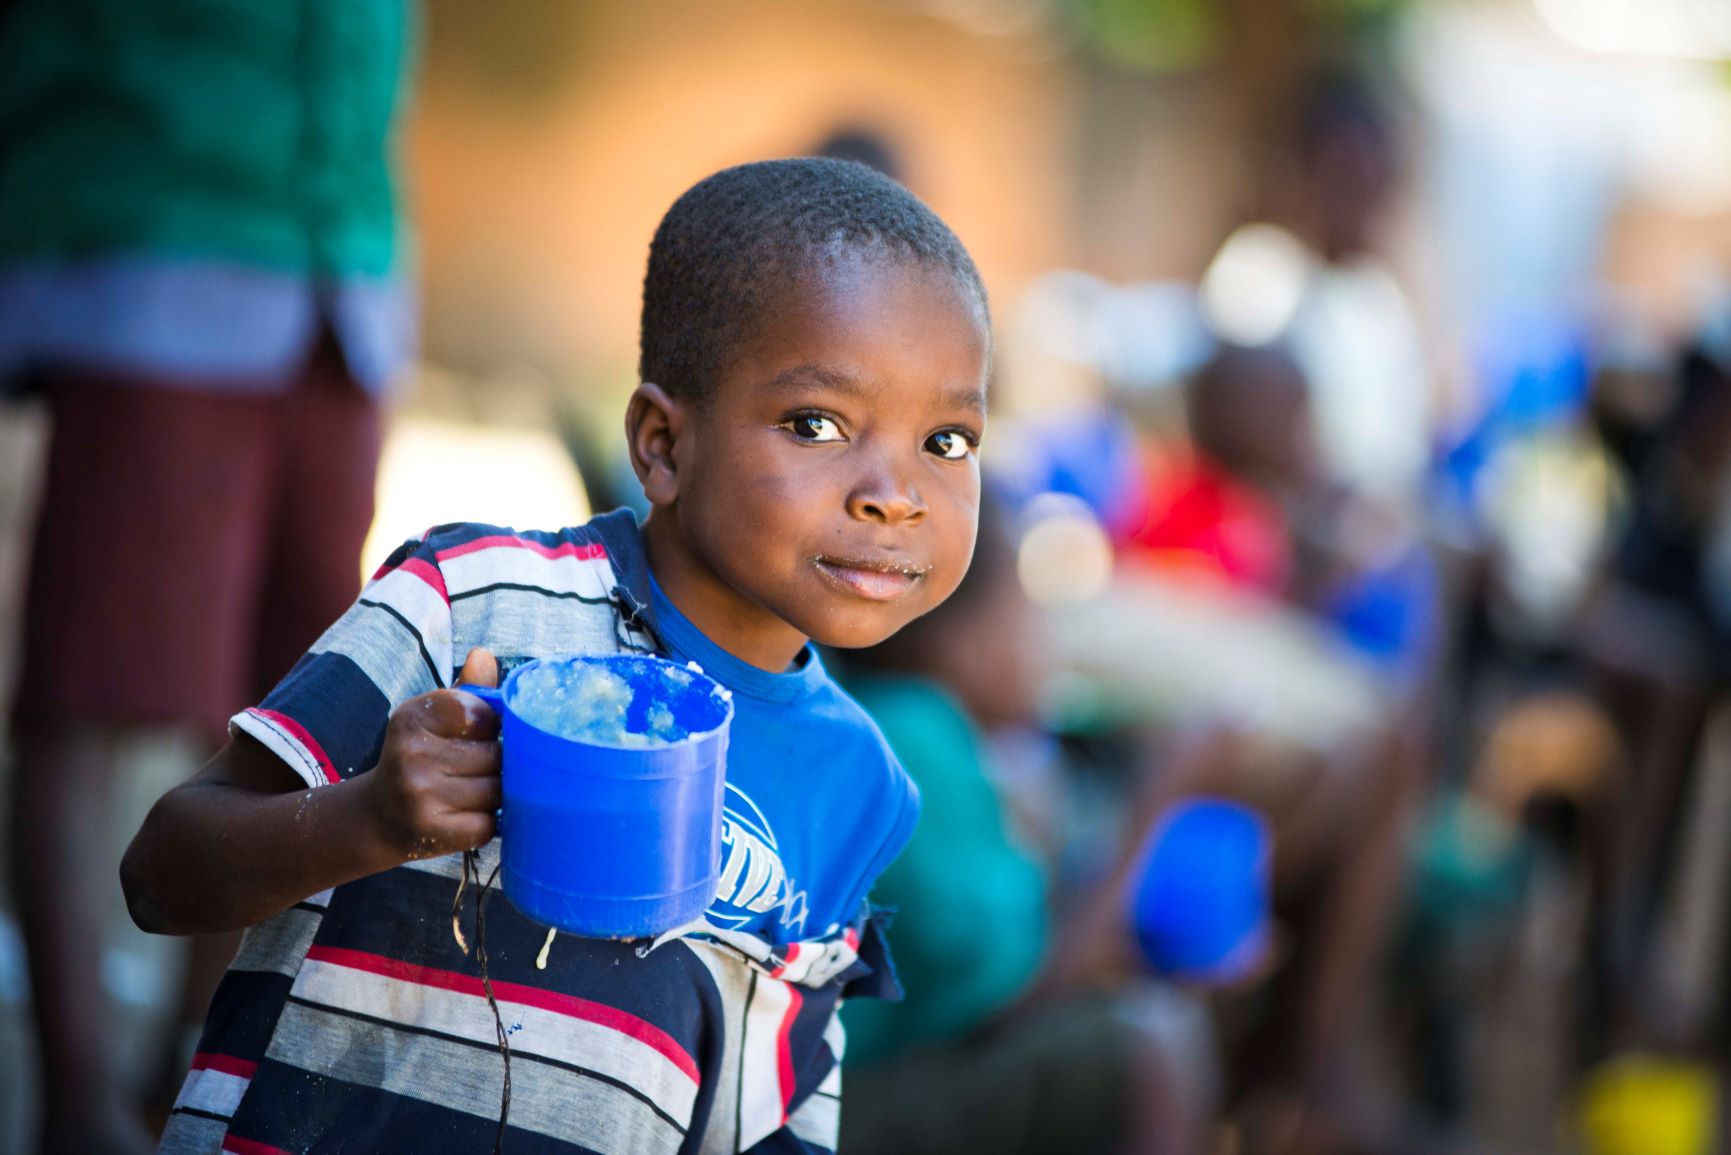 Mary's Meals grows to feed 1.8 million children